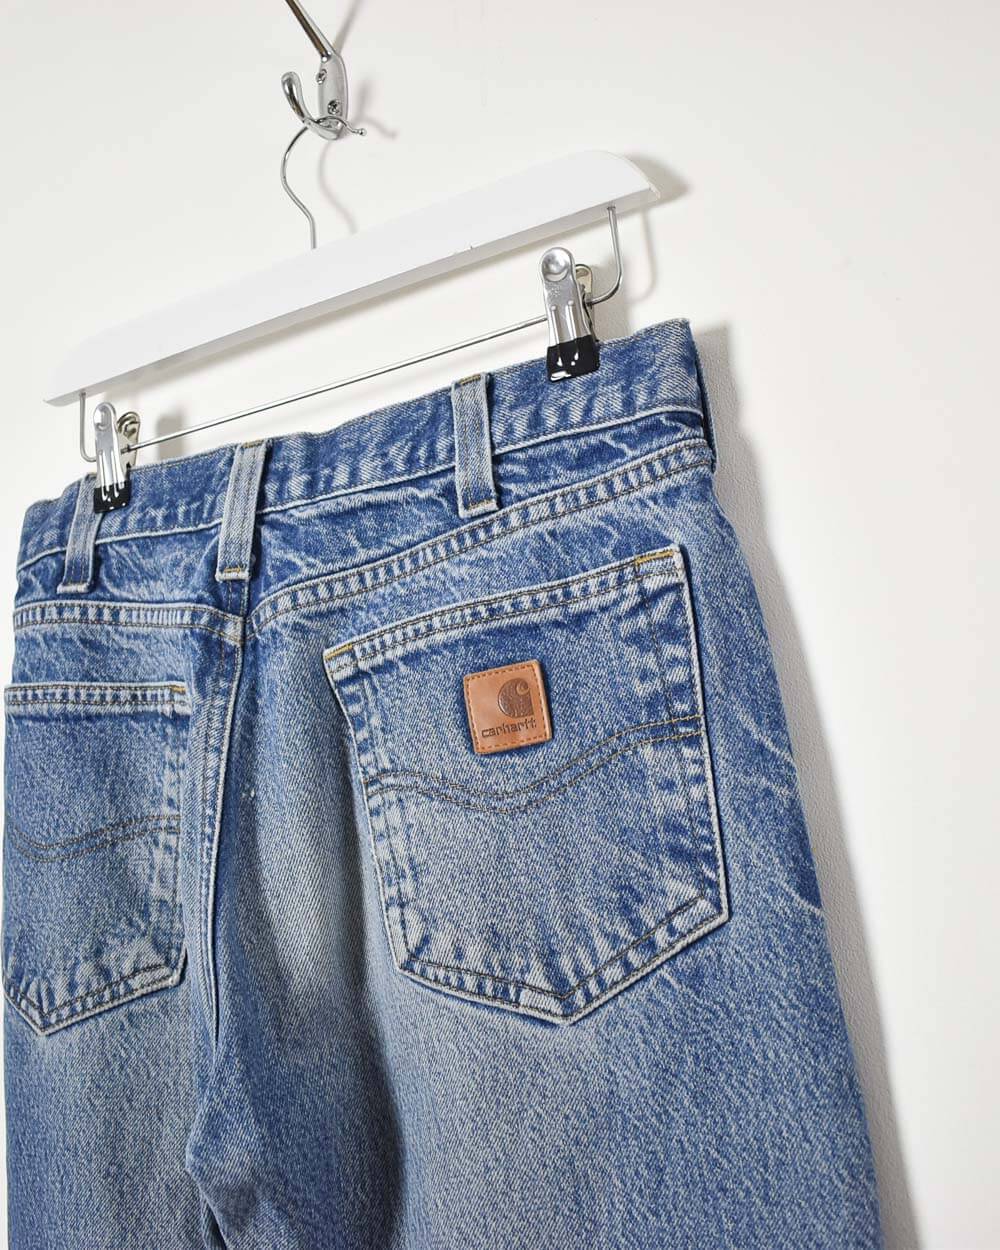 Carhartt Jeans - W31 W32 - Domno Vintage 90s, 80s, 00s Retro and Vintage Clothing 